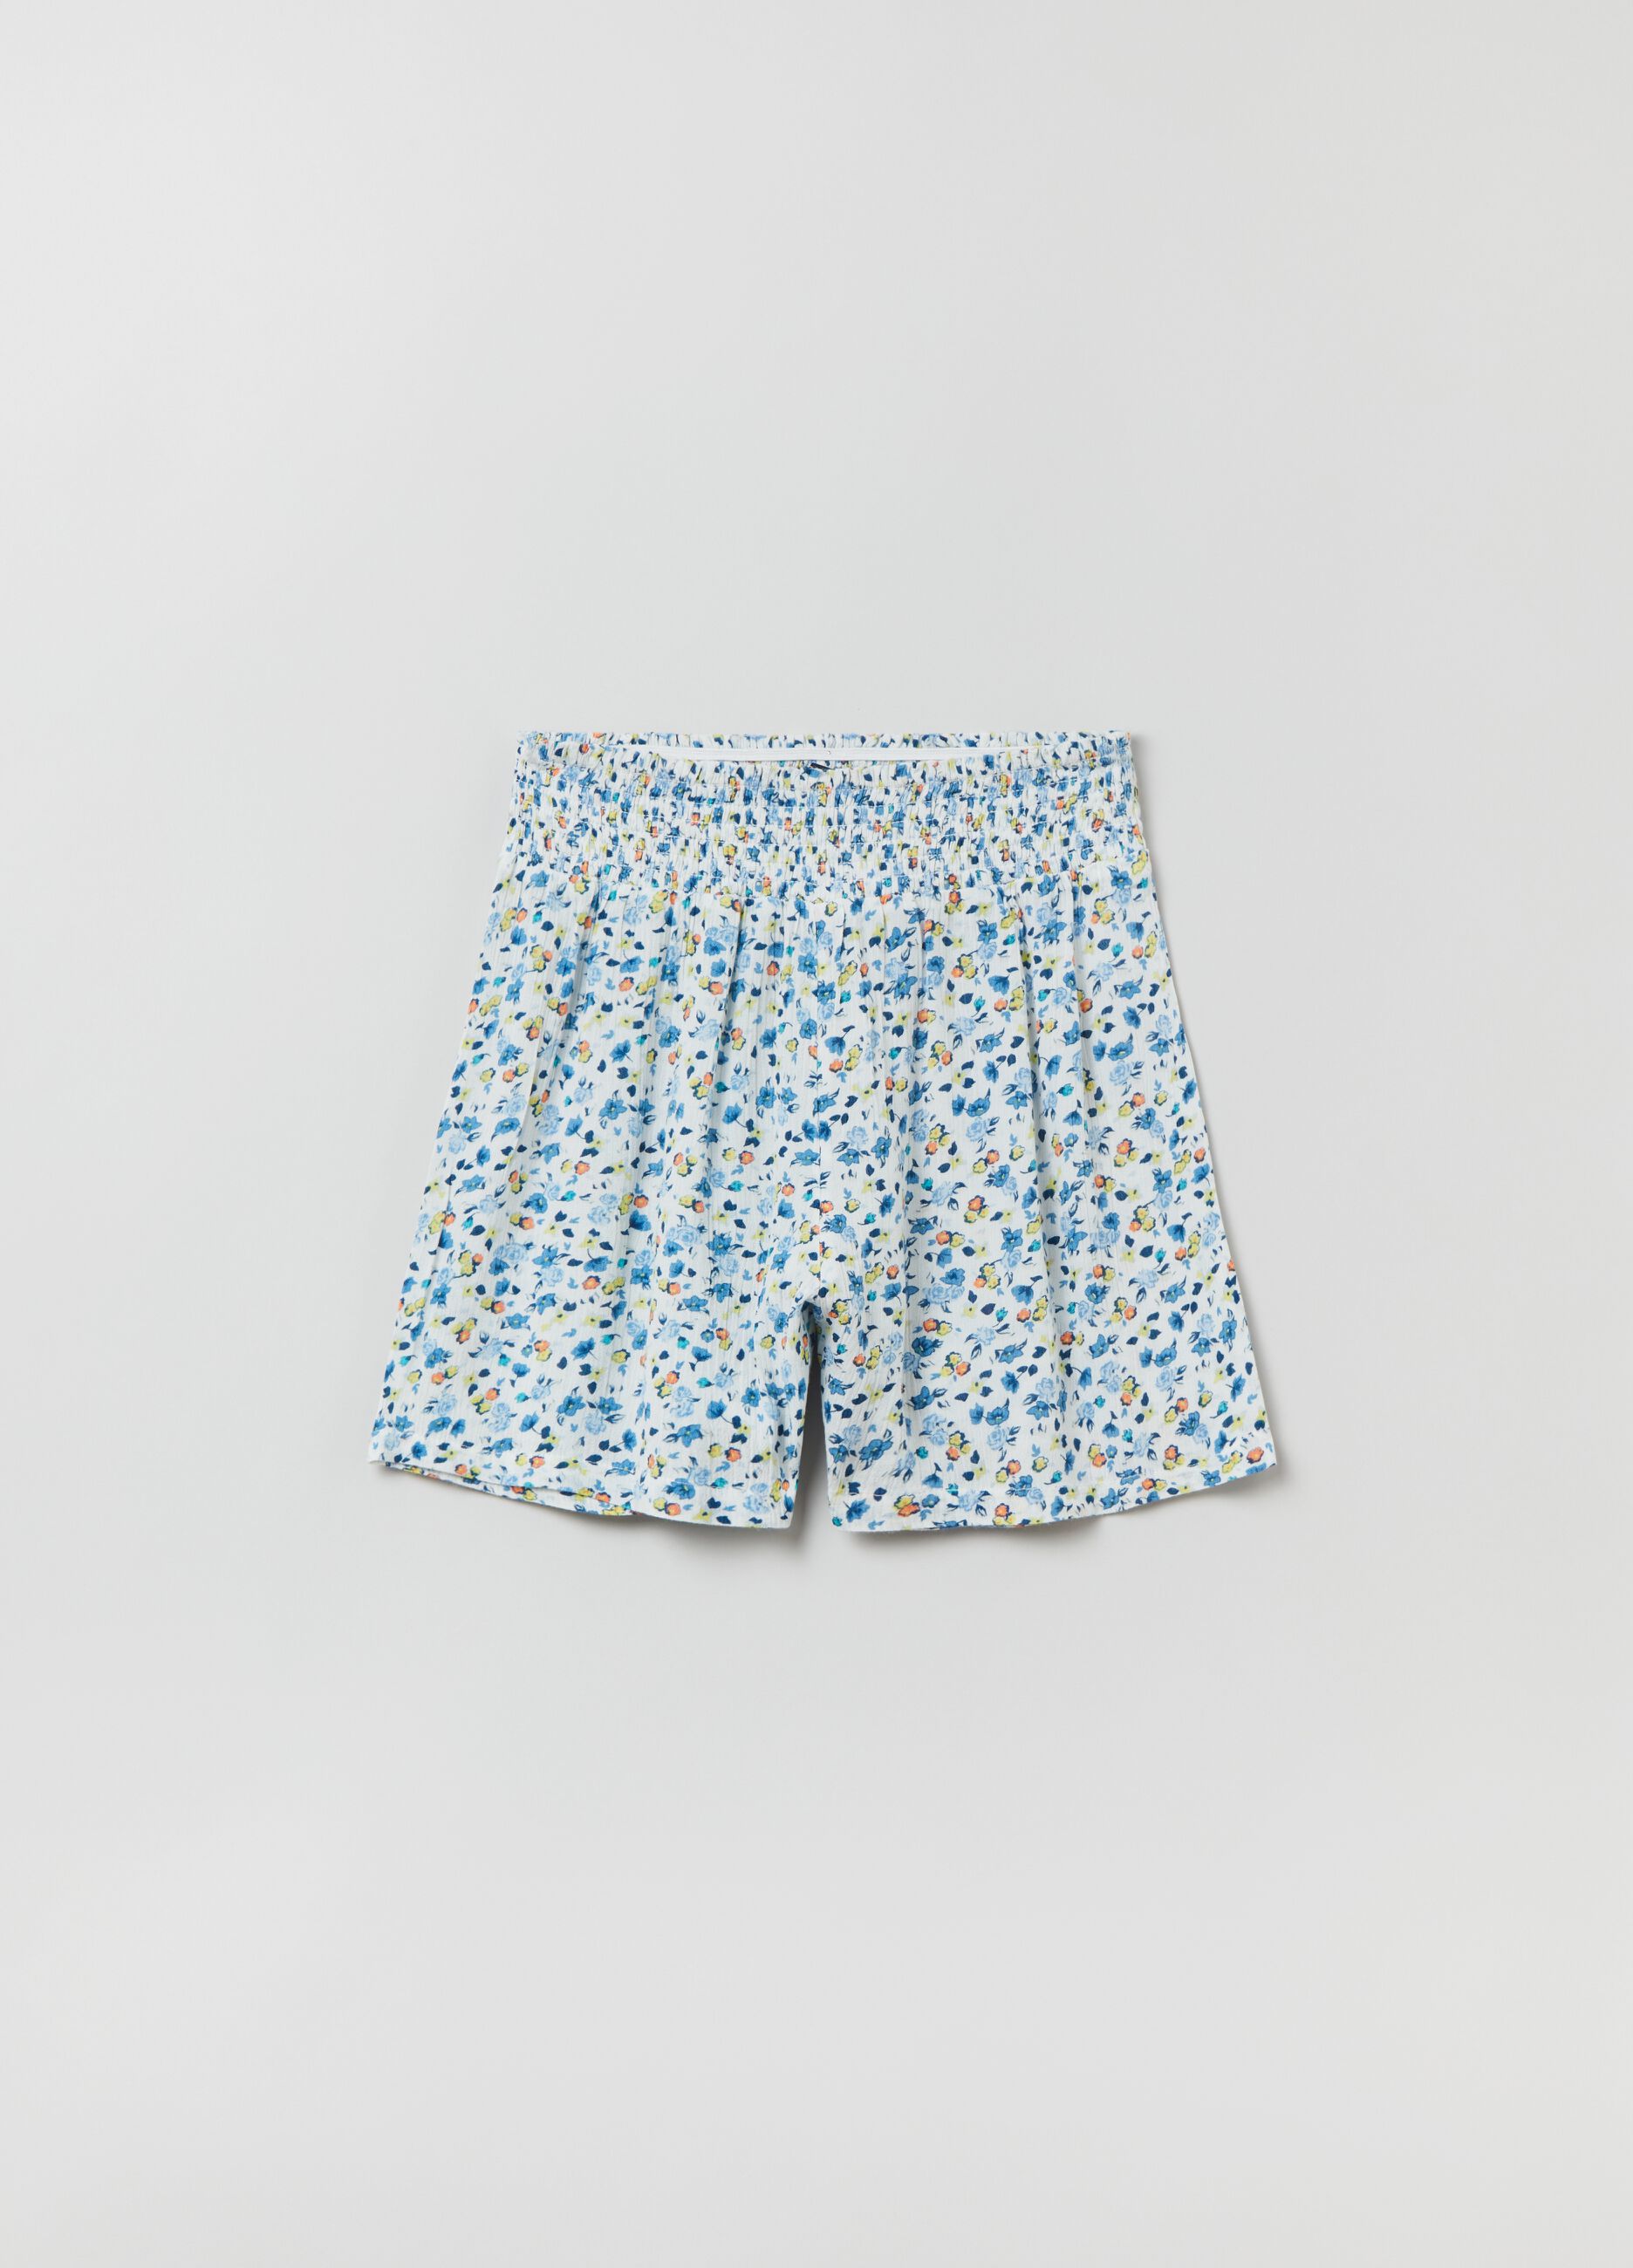 Viscose shorts with small flowers print